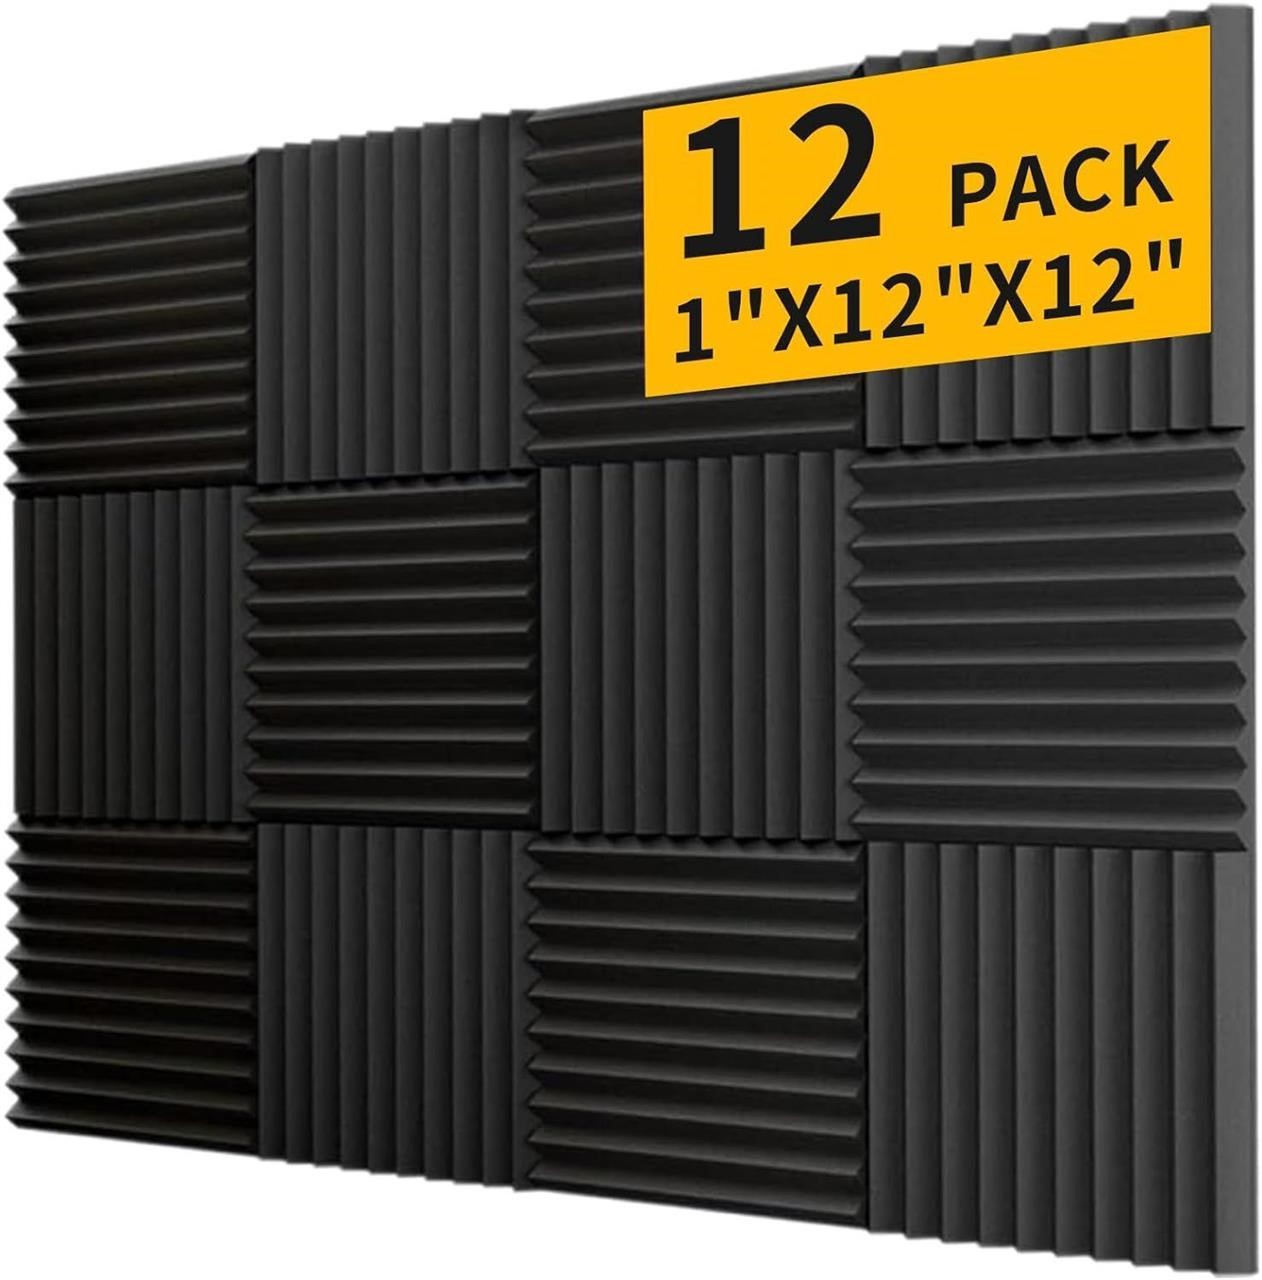 2 Pack forHigh-Density sound proof panels